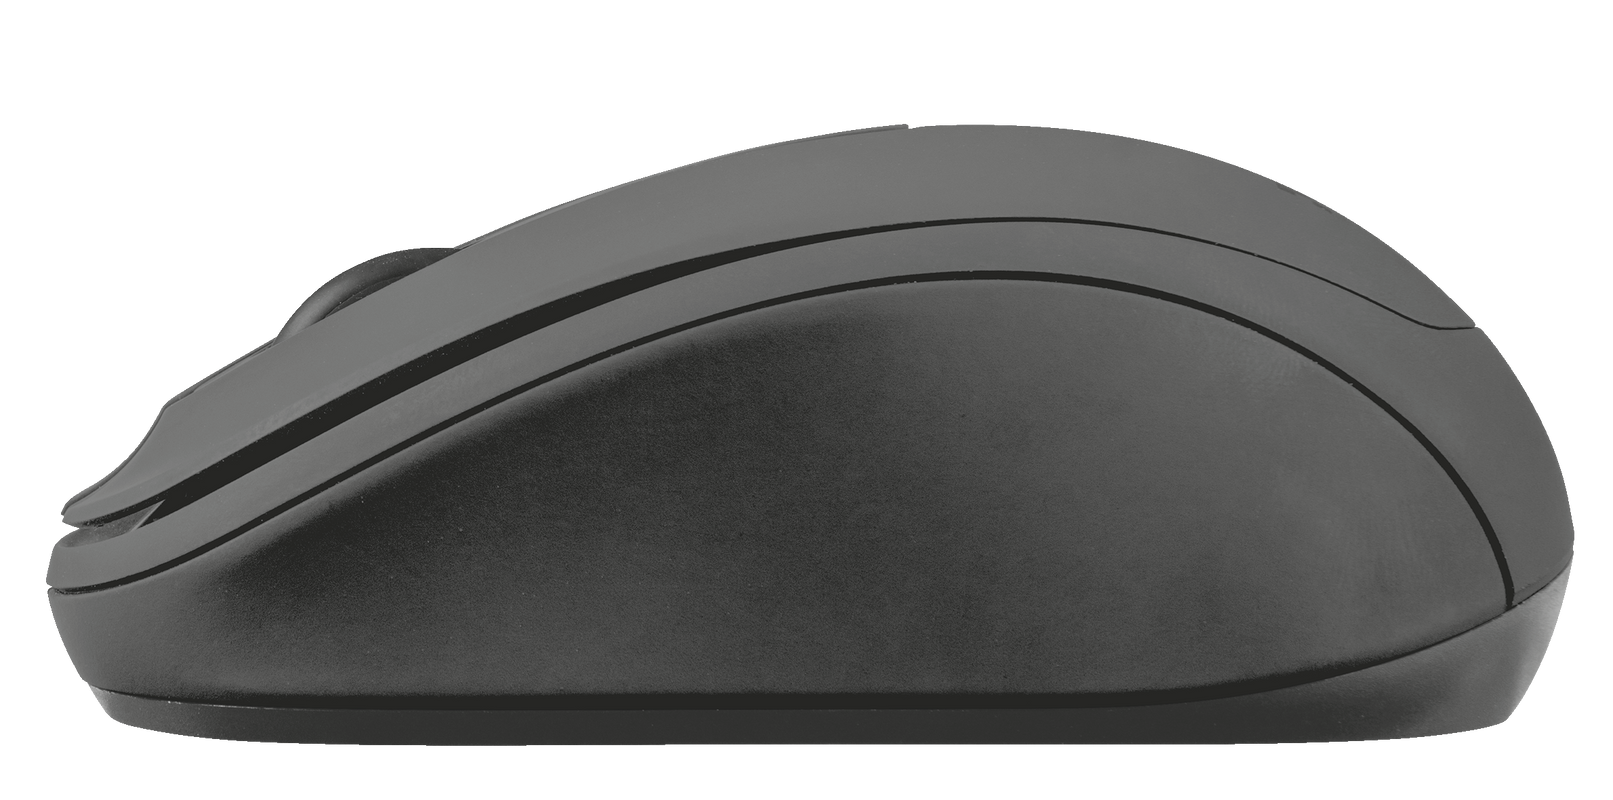 Ziva Wireless Compact Mouse-Side